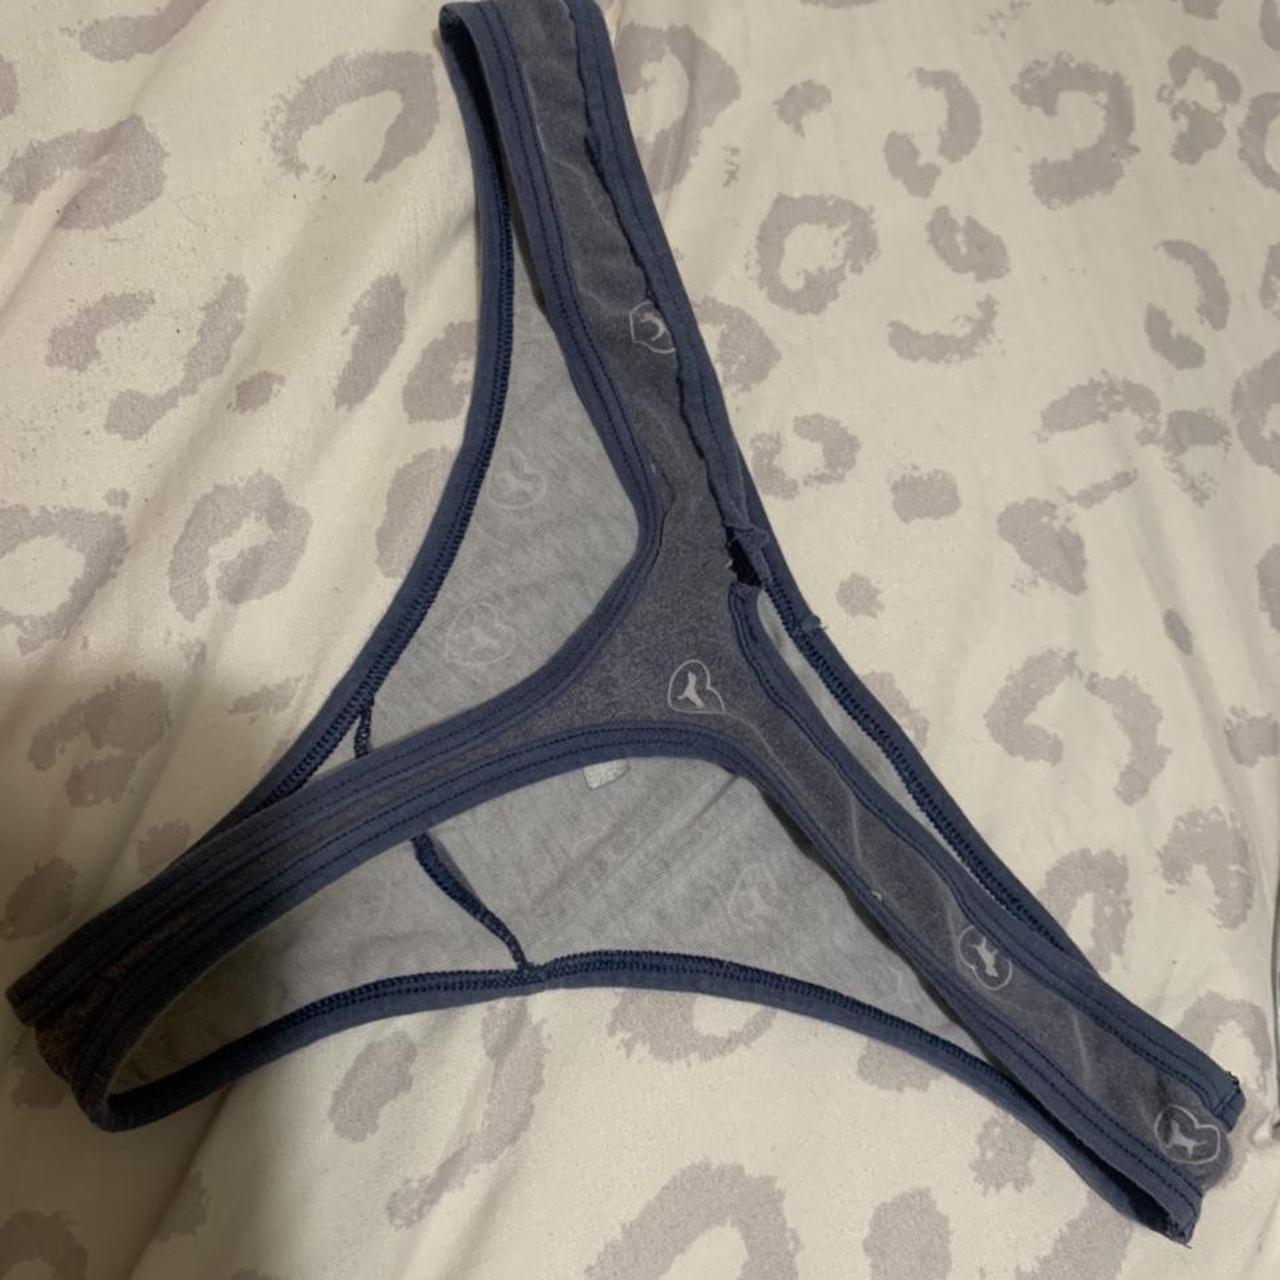 Blue Victoria’s Secret thong with white puppies size